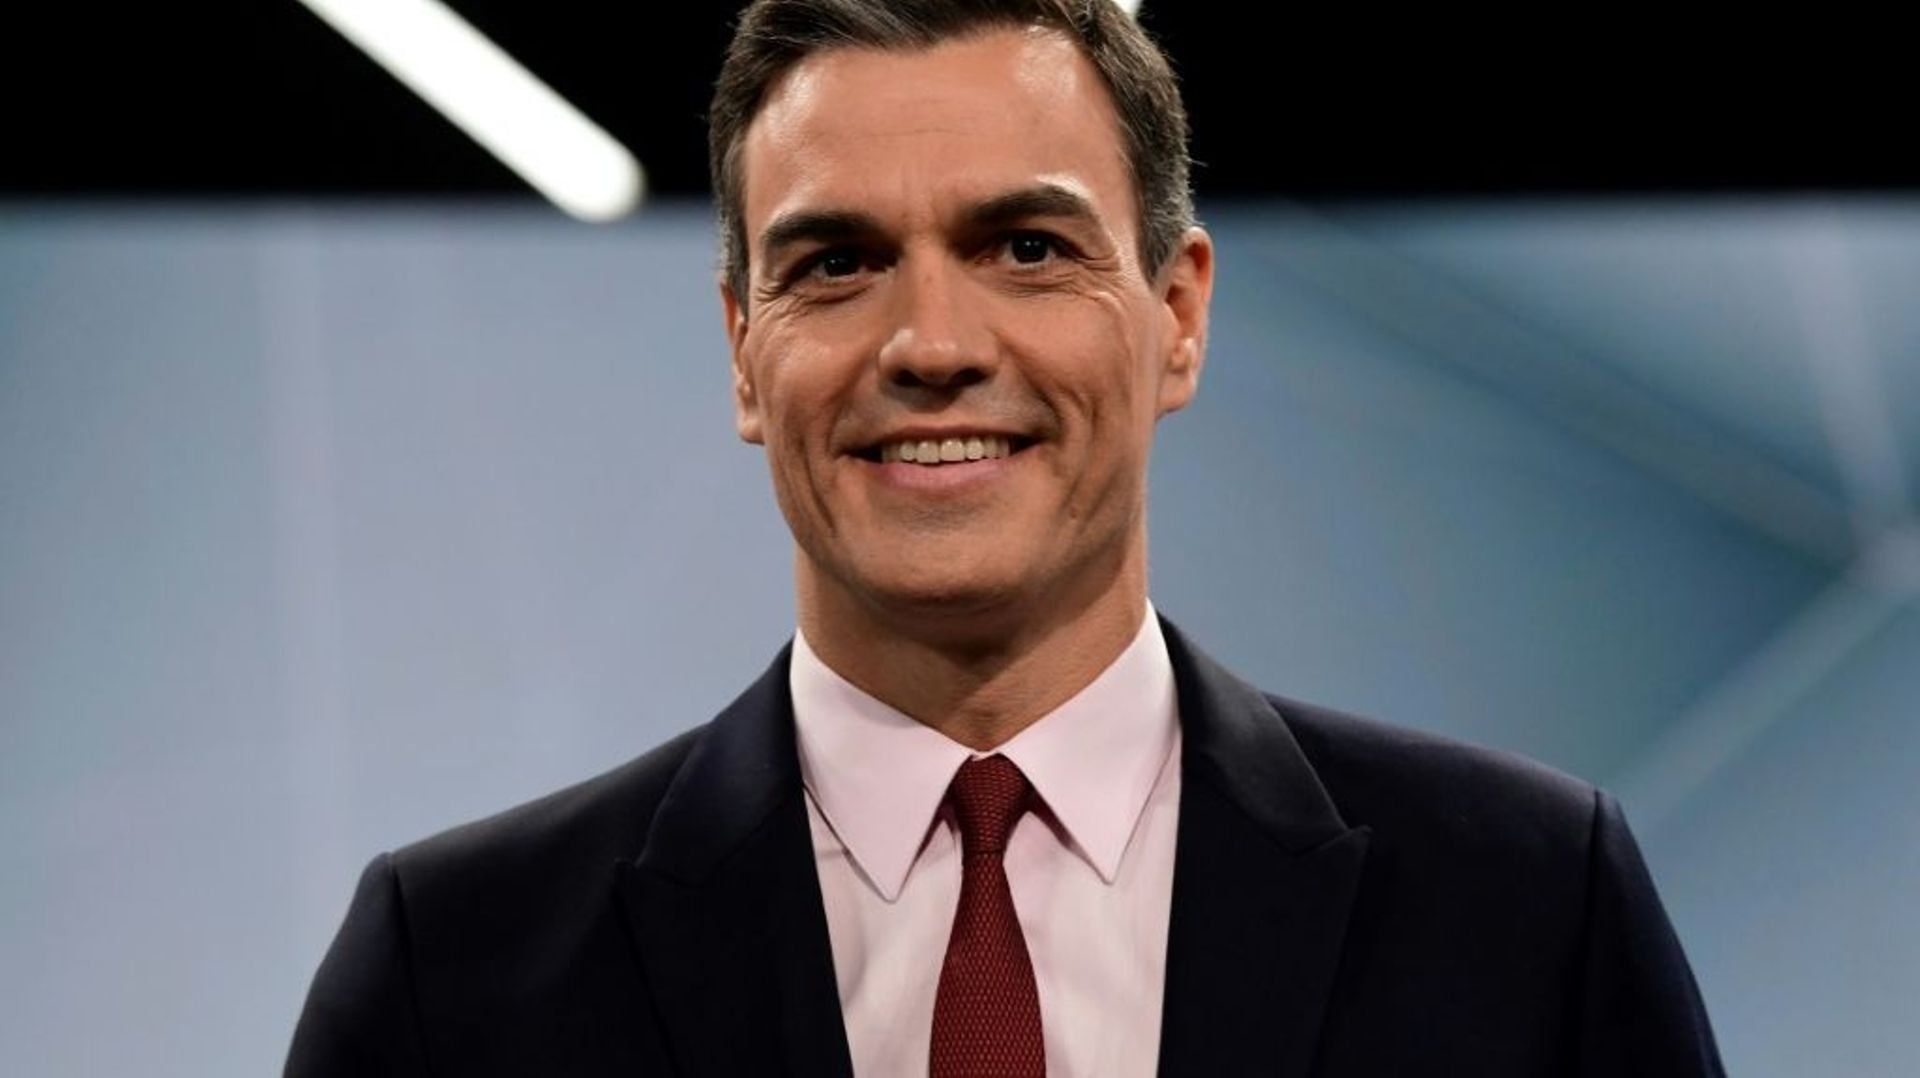 President of Government of Spain congratulates President Ilham Aliyev on election win